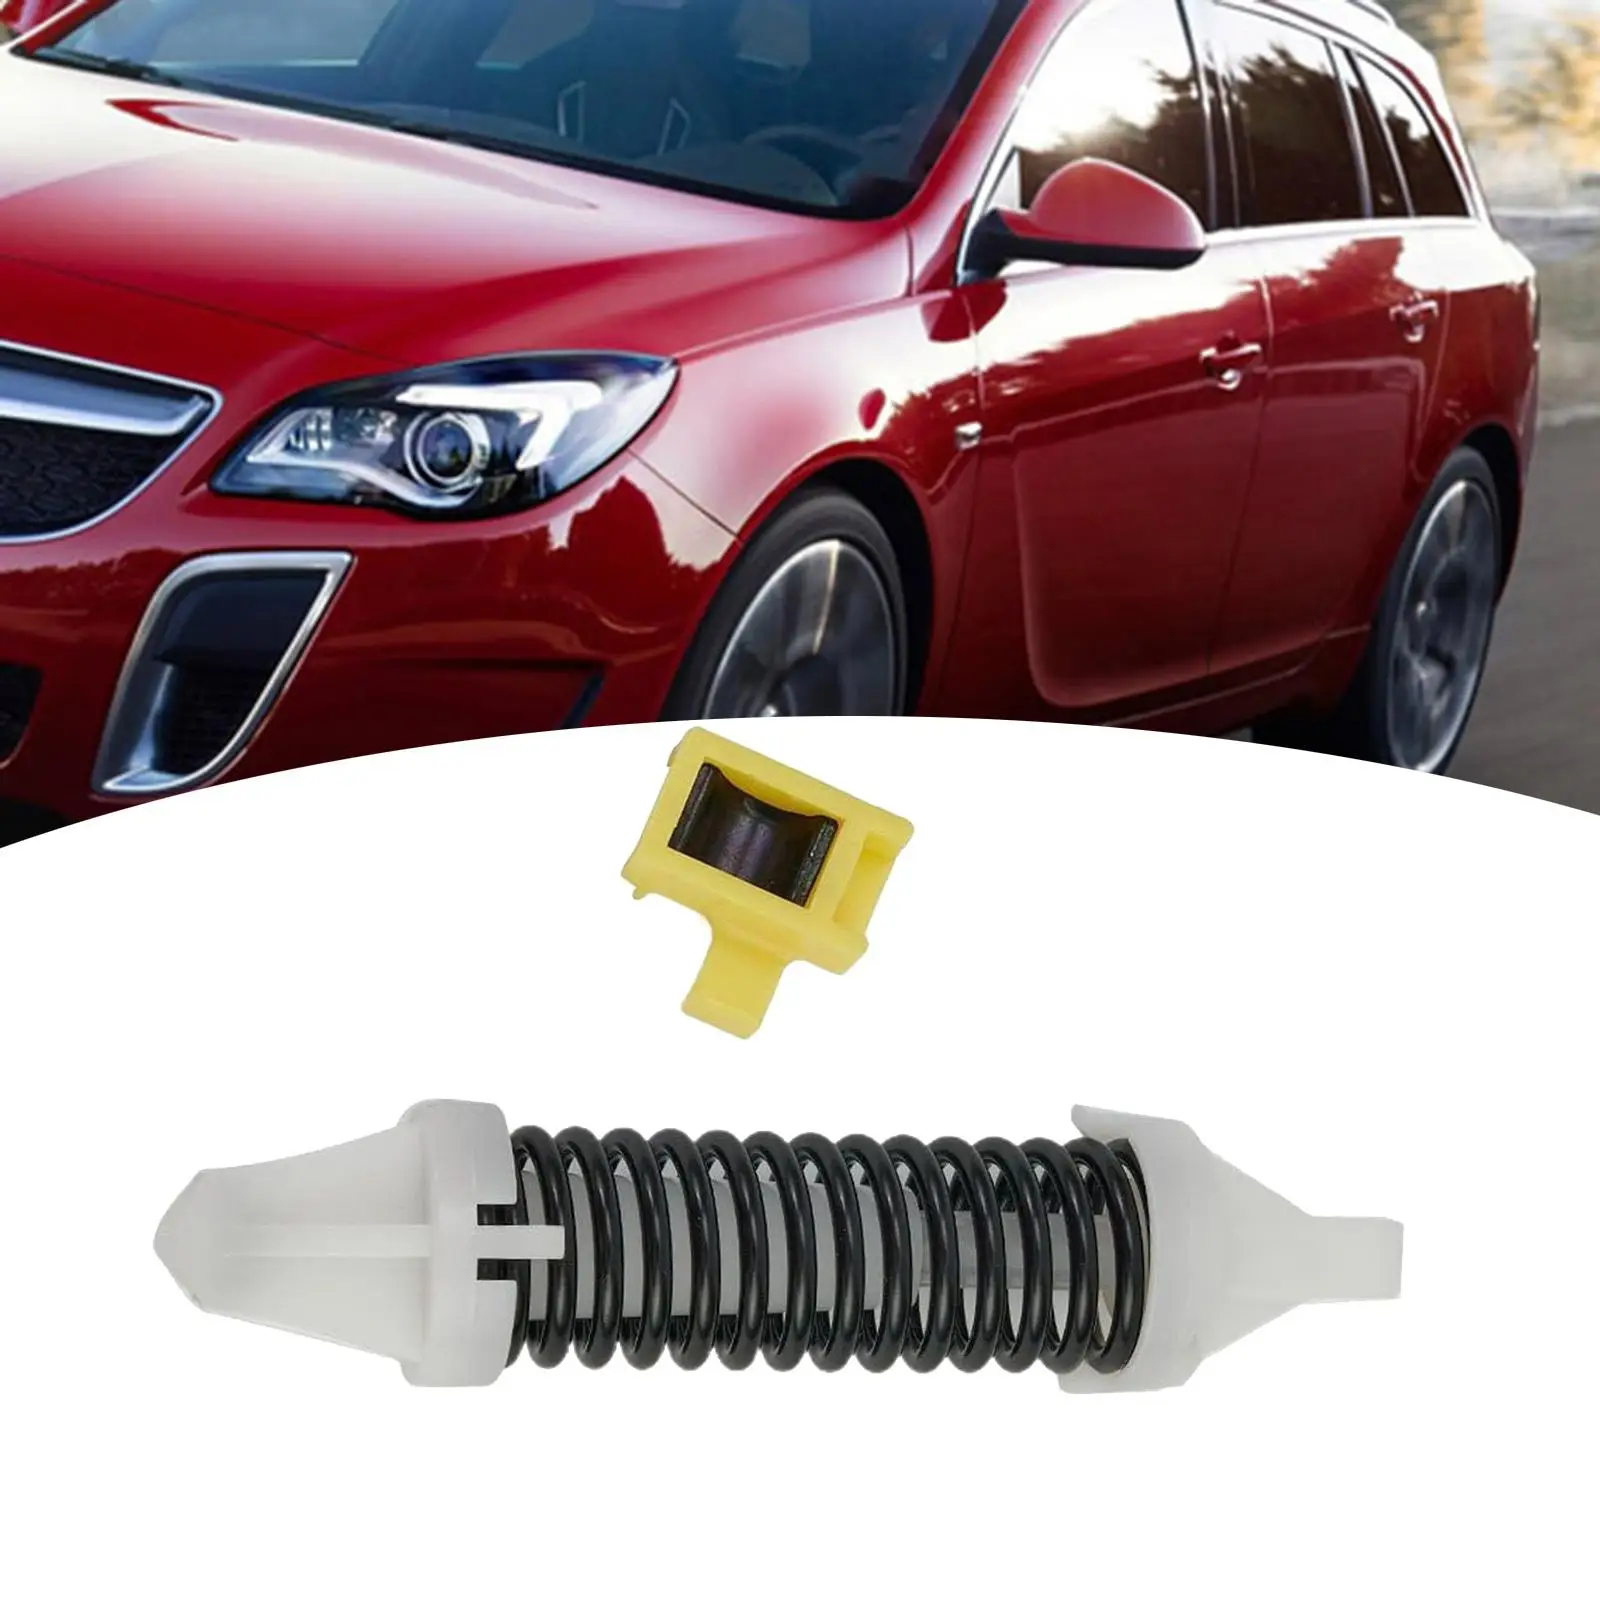 Clutch Pedal Return Spring Replace High Quality 12800290 93183937 9006348 for Vauxhall Opel Signum 2003-2008 Accessories